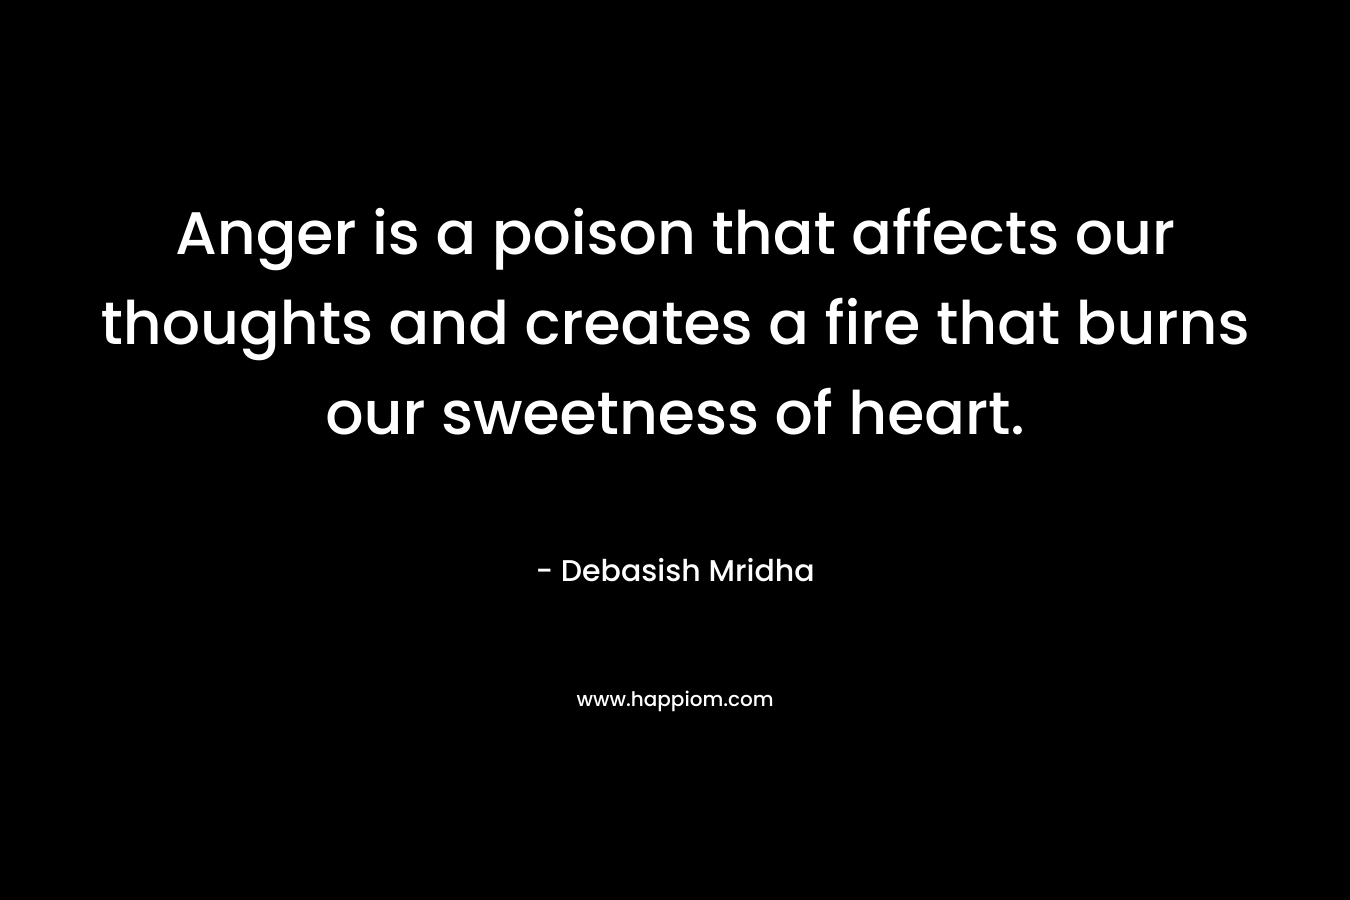 Anger is a poison that affects our thoughts and creates a fire that burns our sweetness of heart.